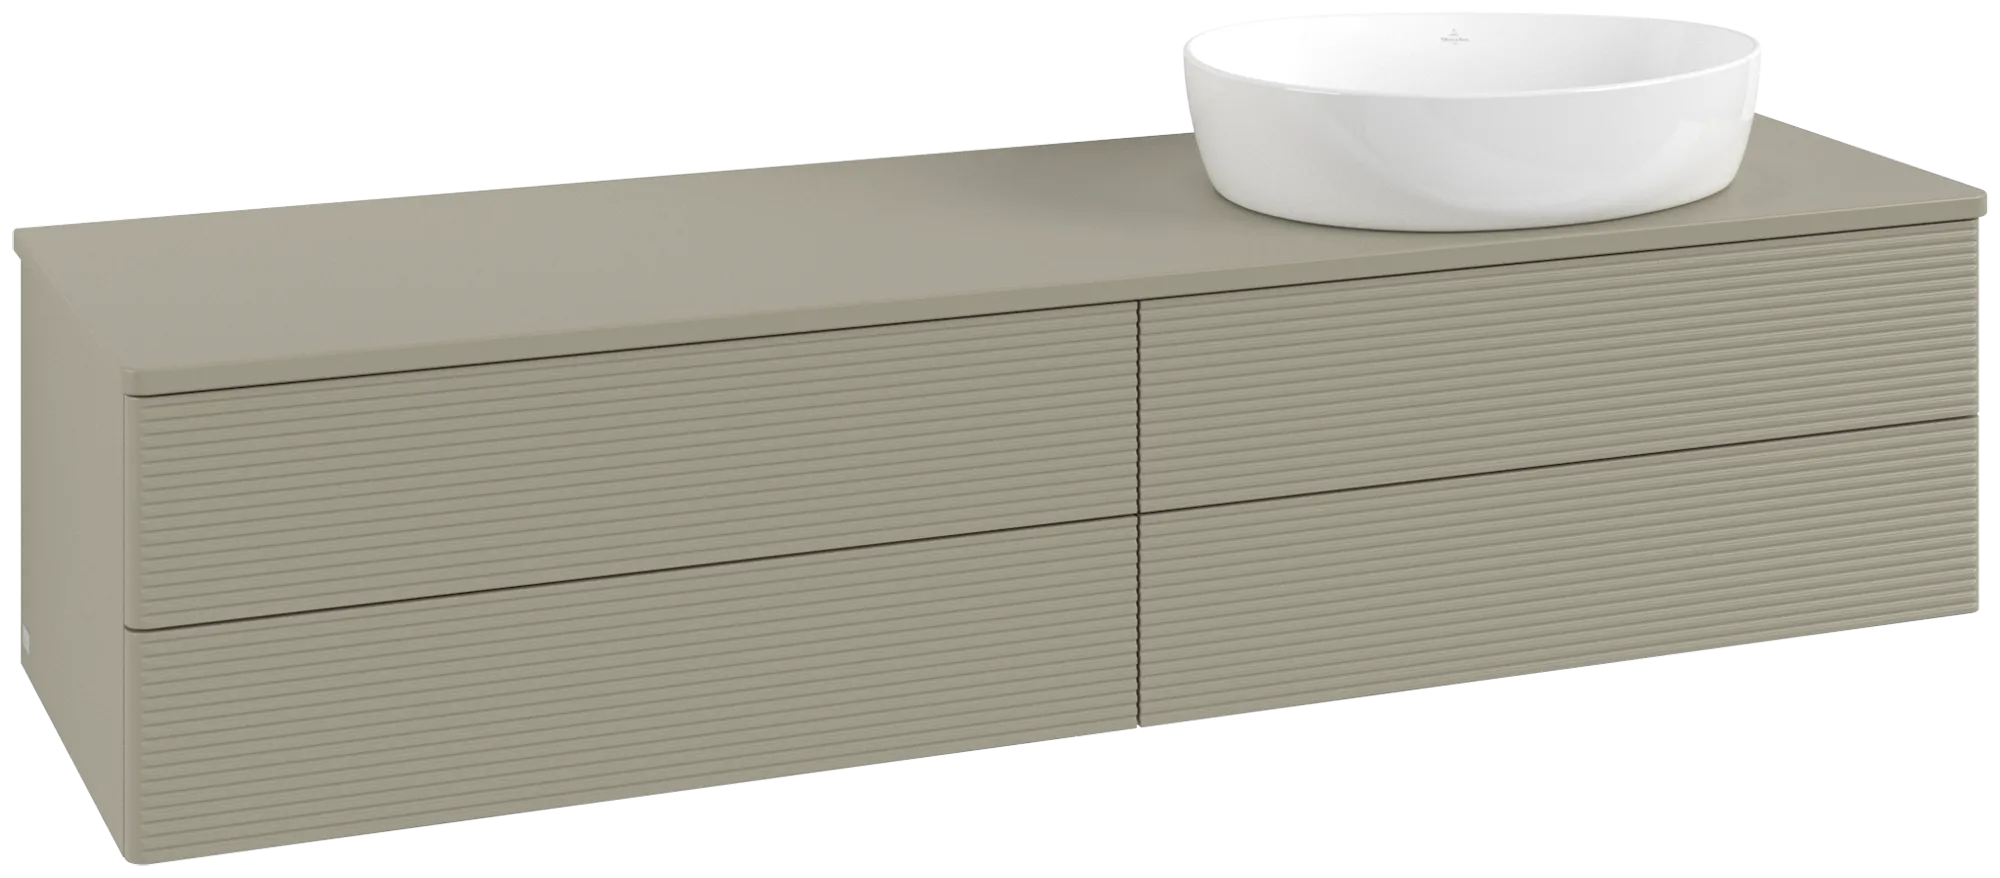 VILLEROY BOCH Antao Vanity unit, 4 pull-out compartments, 1600 x 360 x 500 mm, Front with grain texture, Stone Grey Matt Lacquer / Stone Grey Matt Lacquer #K27150HK resmi